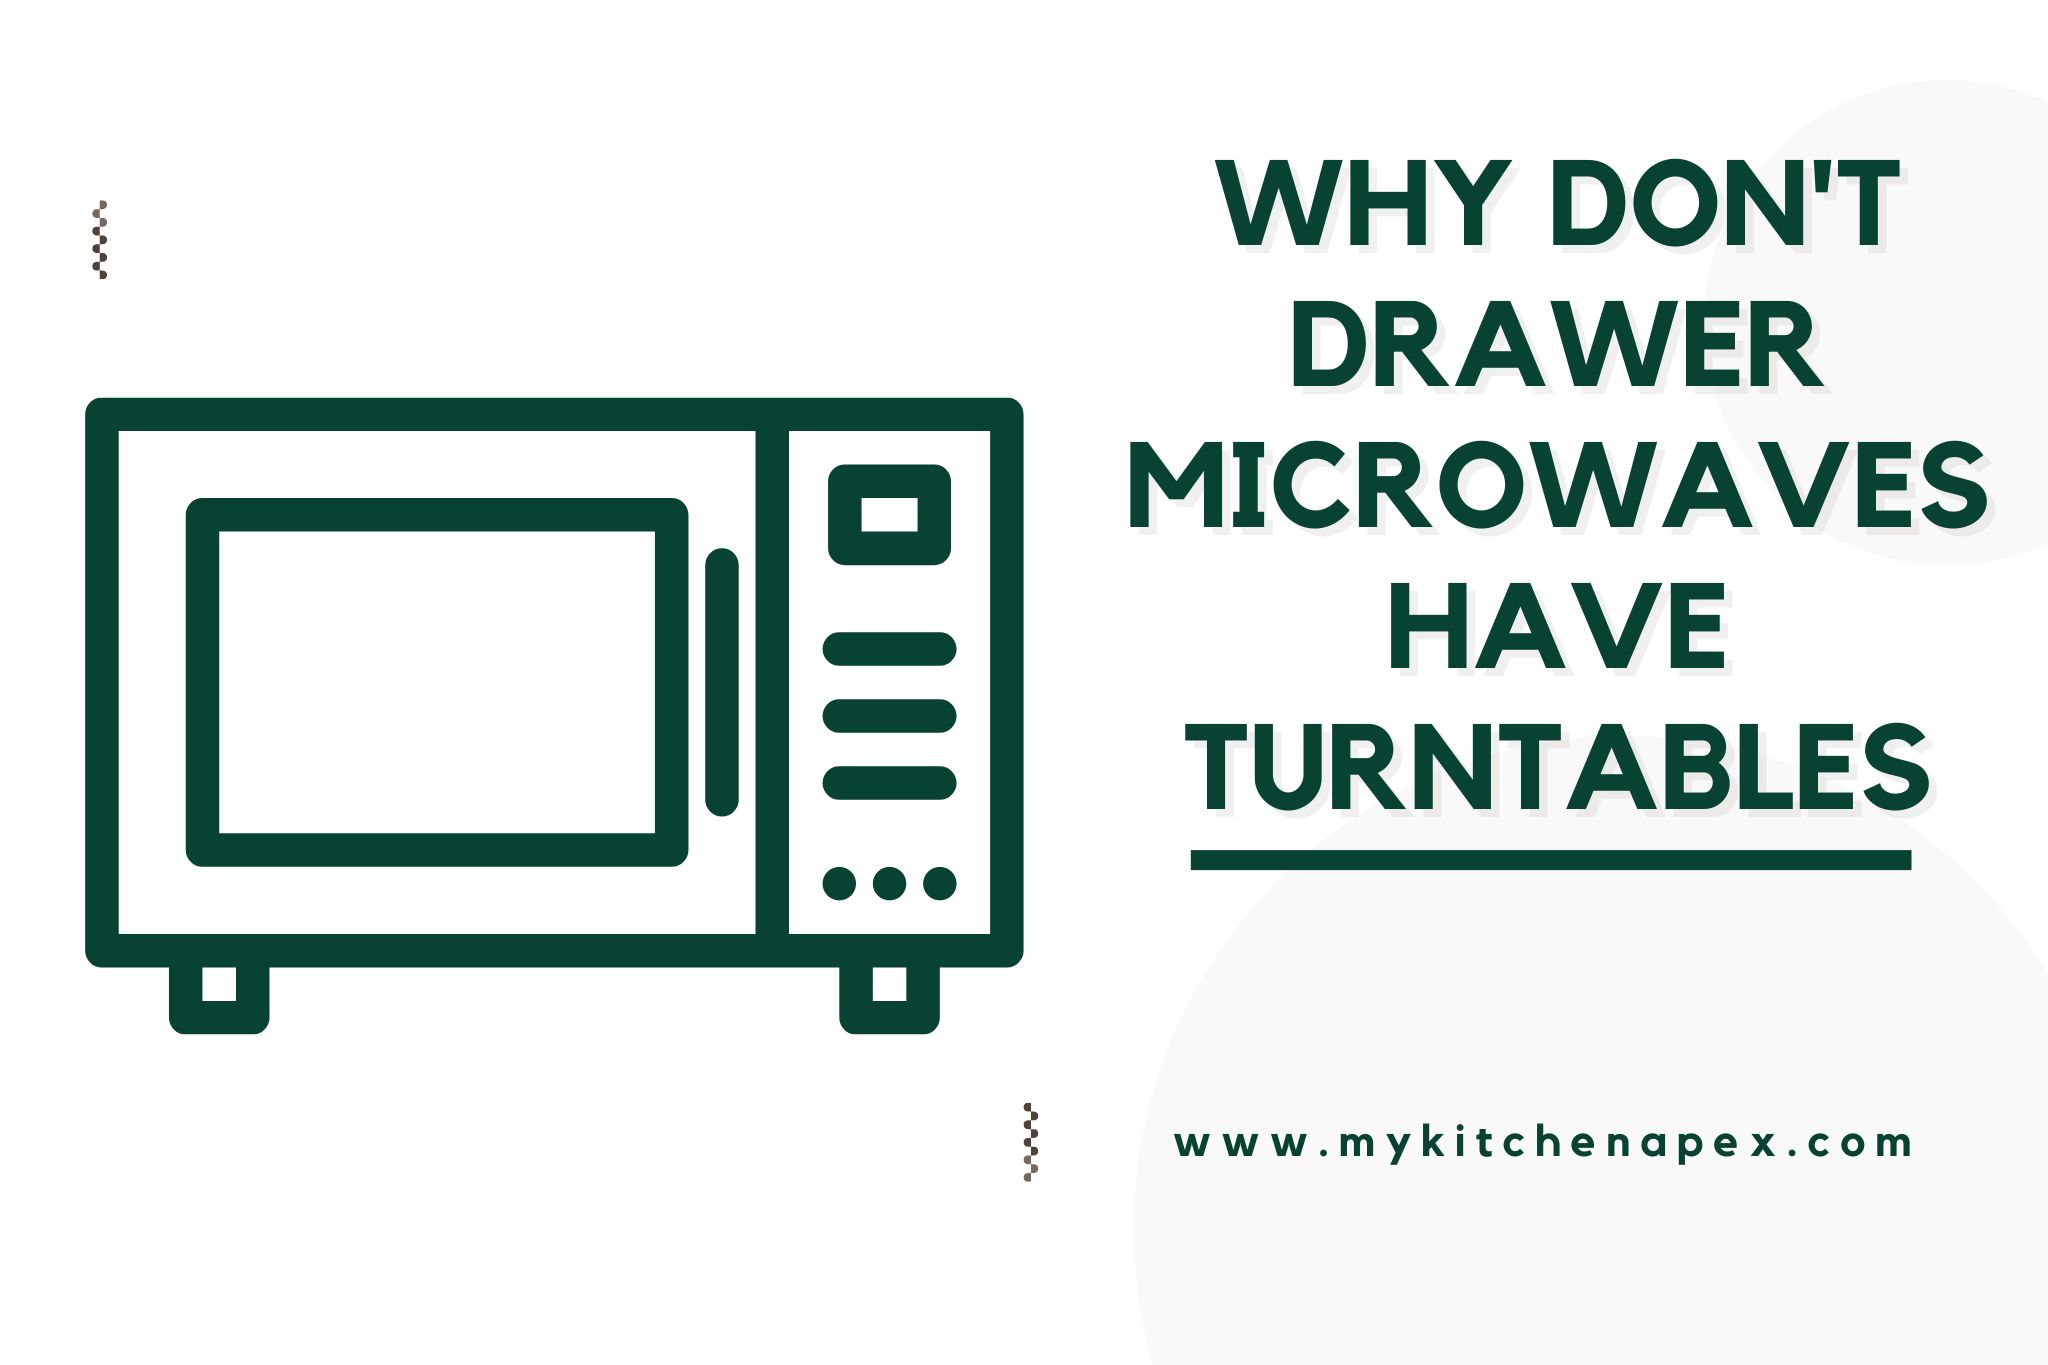 why don't drawer microwaves have turntables